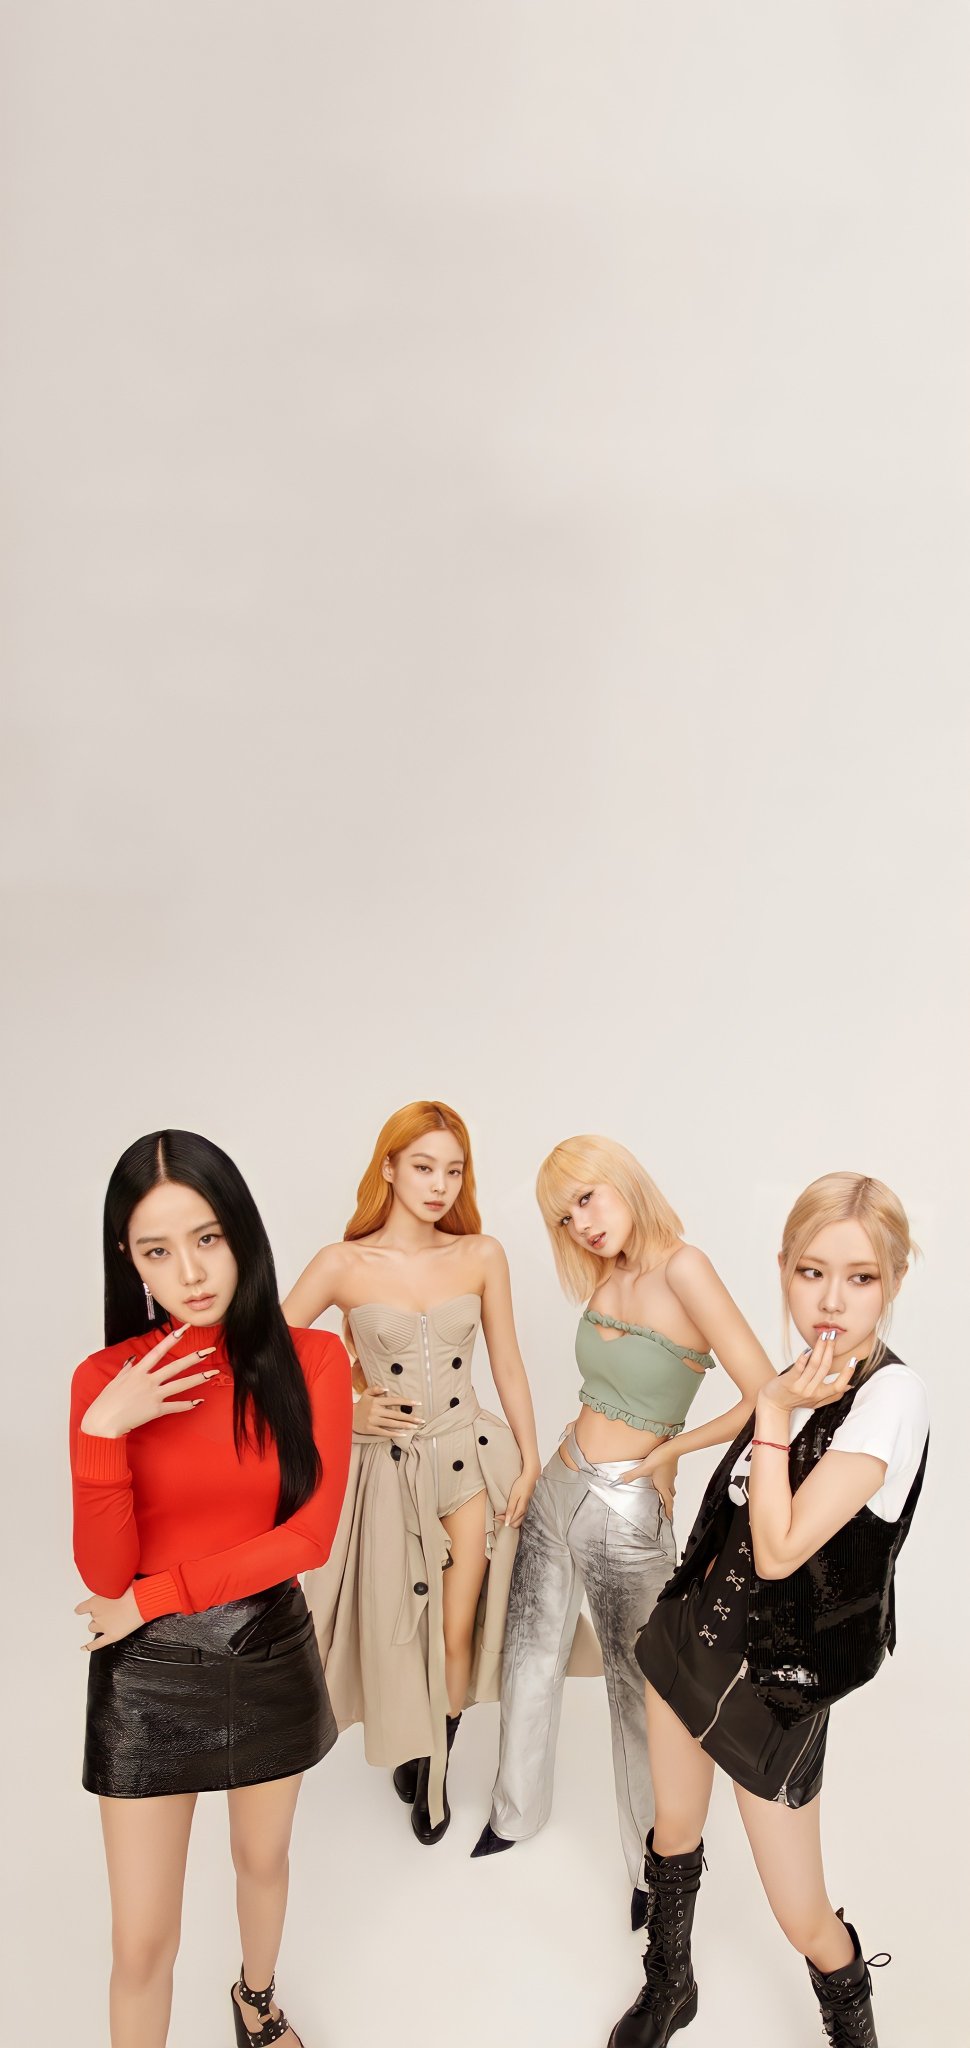 70 BlackPink HD Wallpapers and Backgrounds